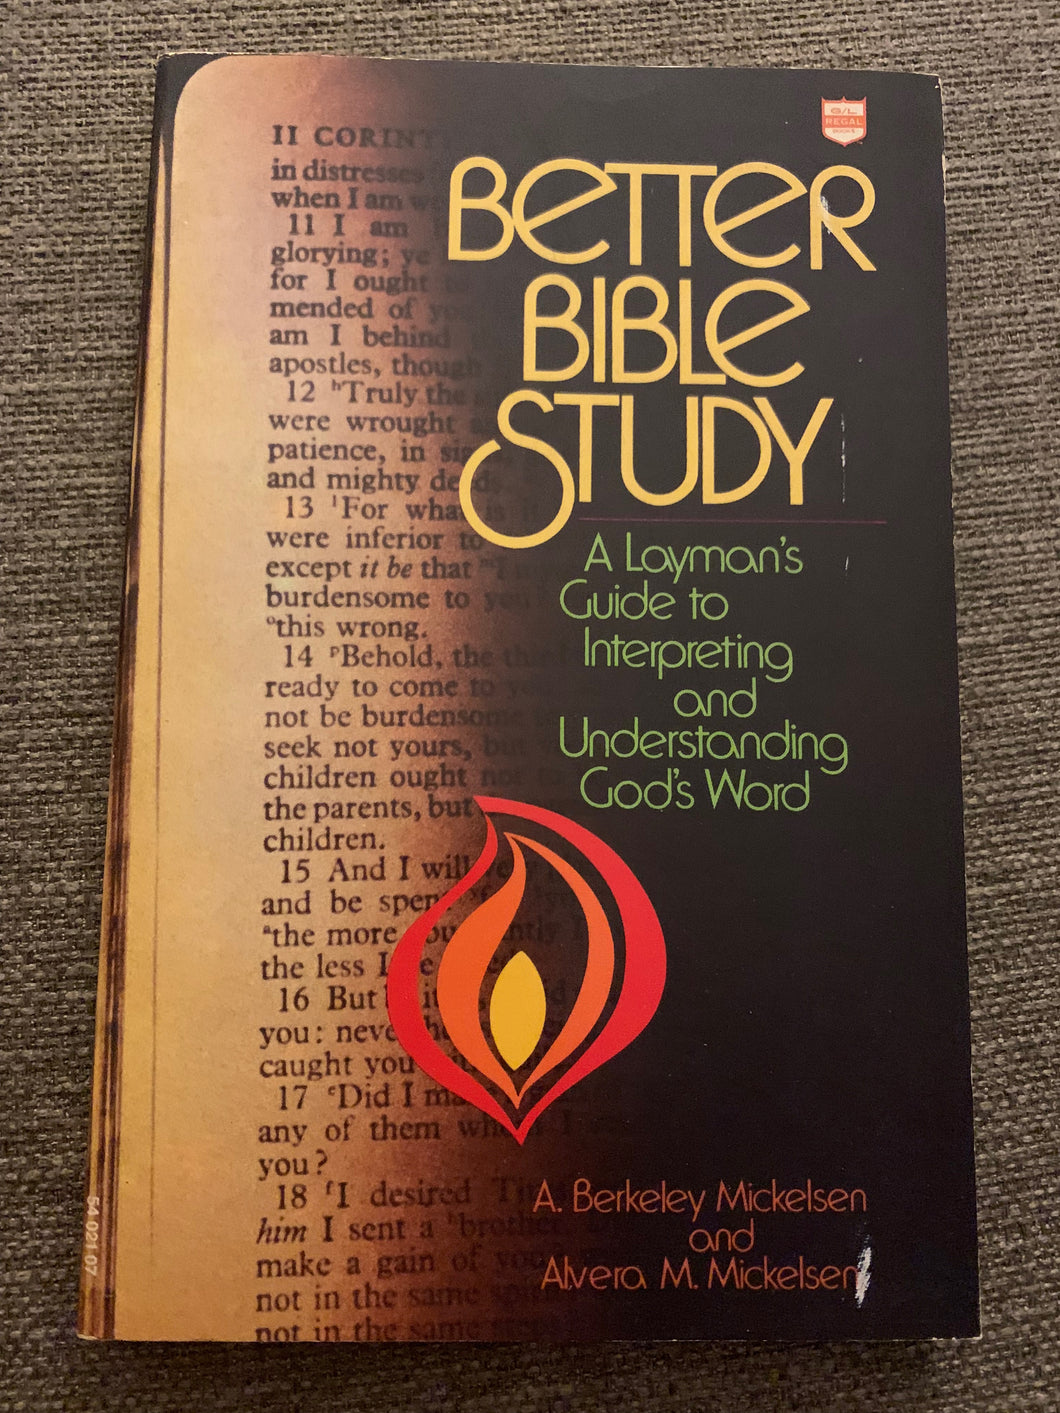 Better Bible Study: A Layman's Guide to Interpreting and Understanding God's Word by A. Berkeley Mickelsen and Alvera M. Mickelsen